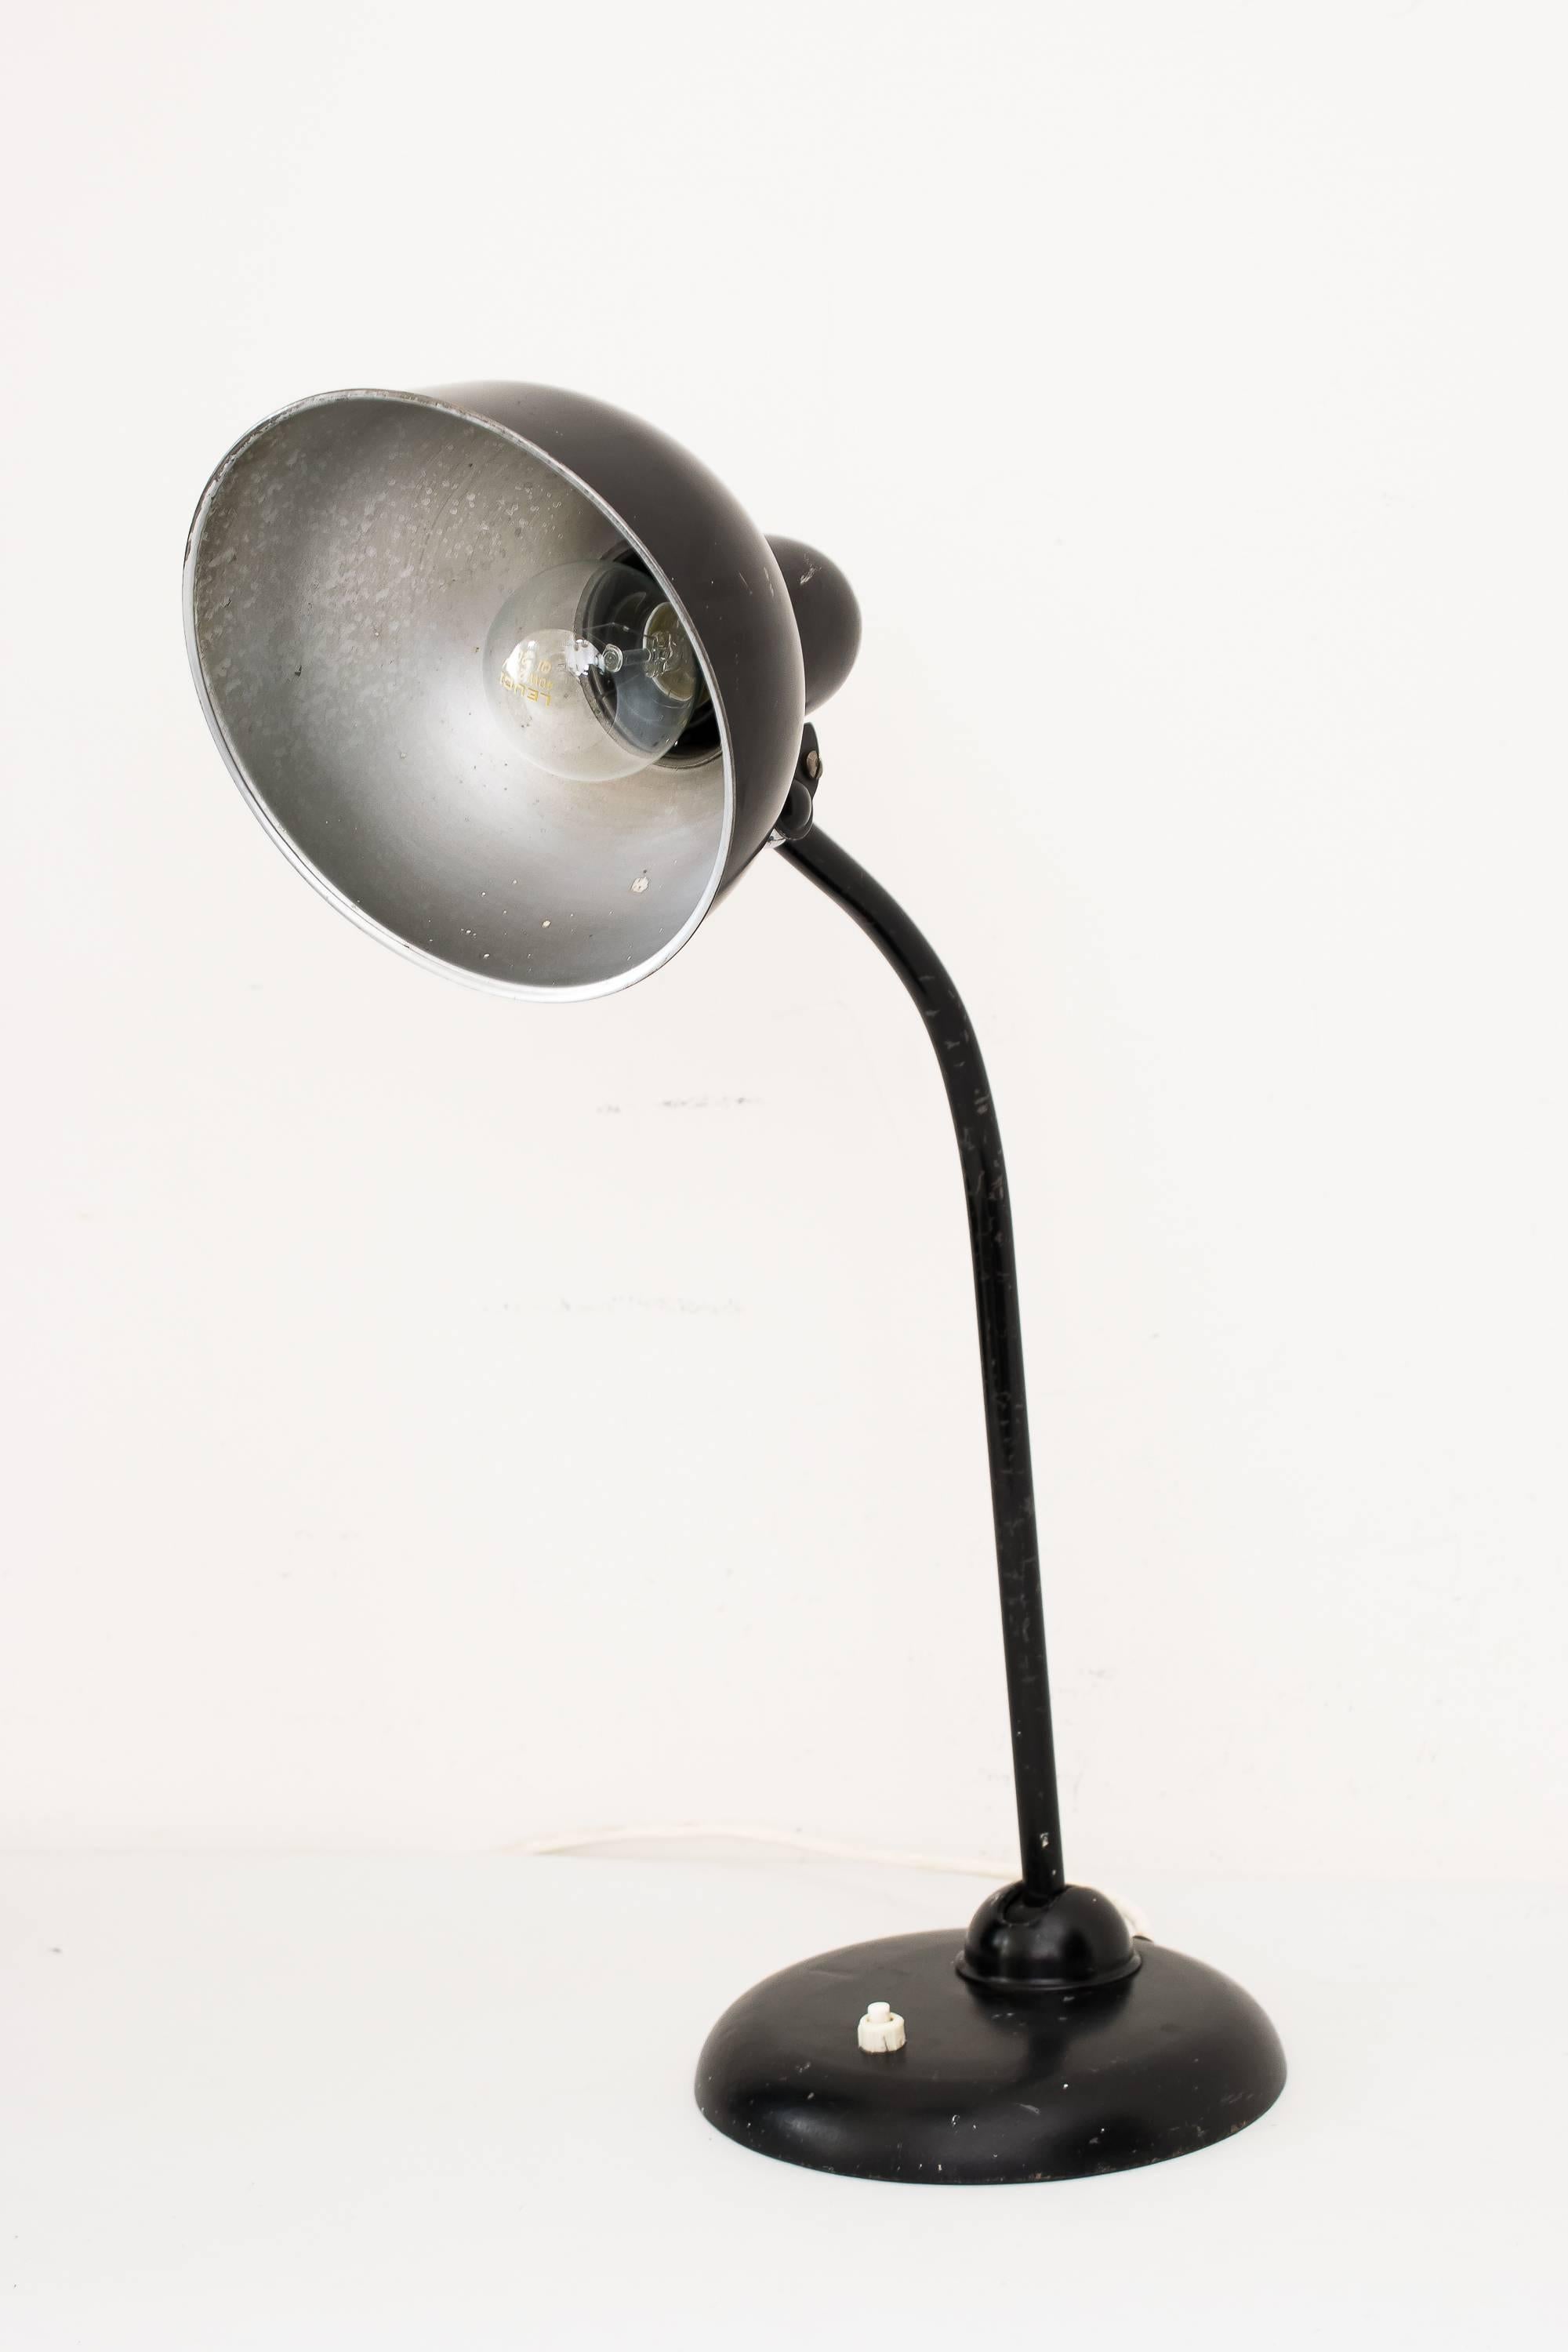 Enameled steel adjustable desk lamp designed by Christian Dell for Idell Kaiser Germany, circa 1930s.
Original condition.